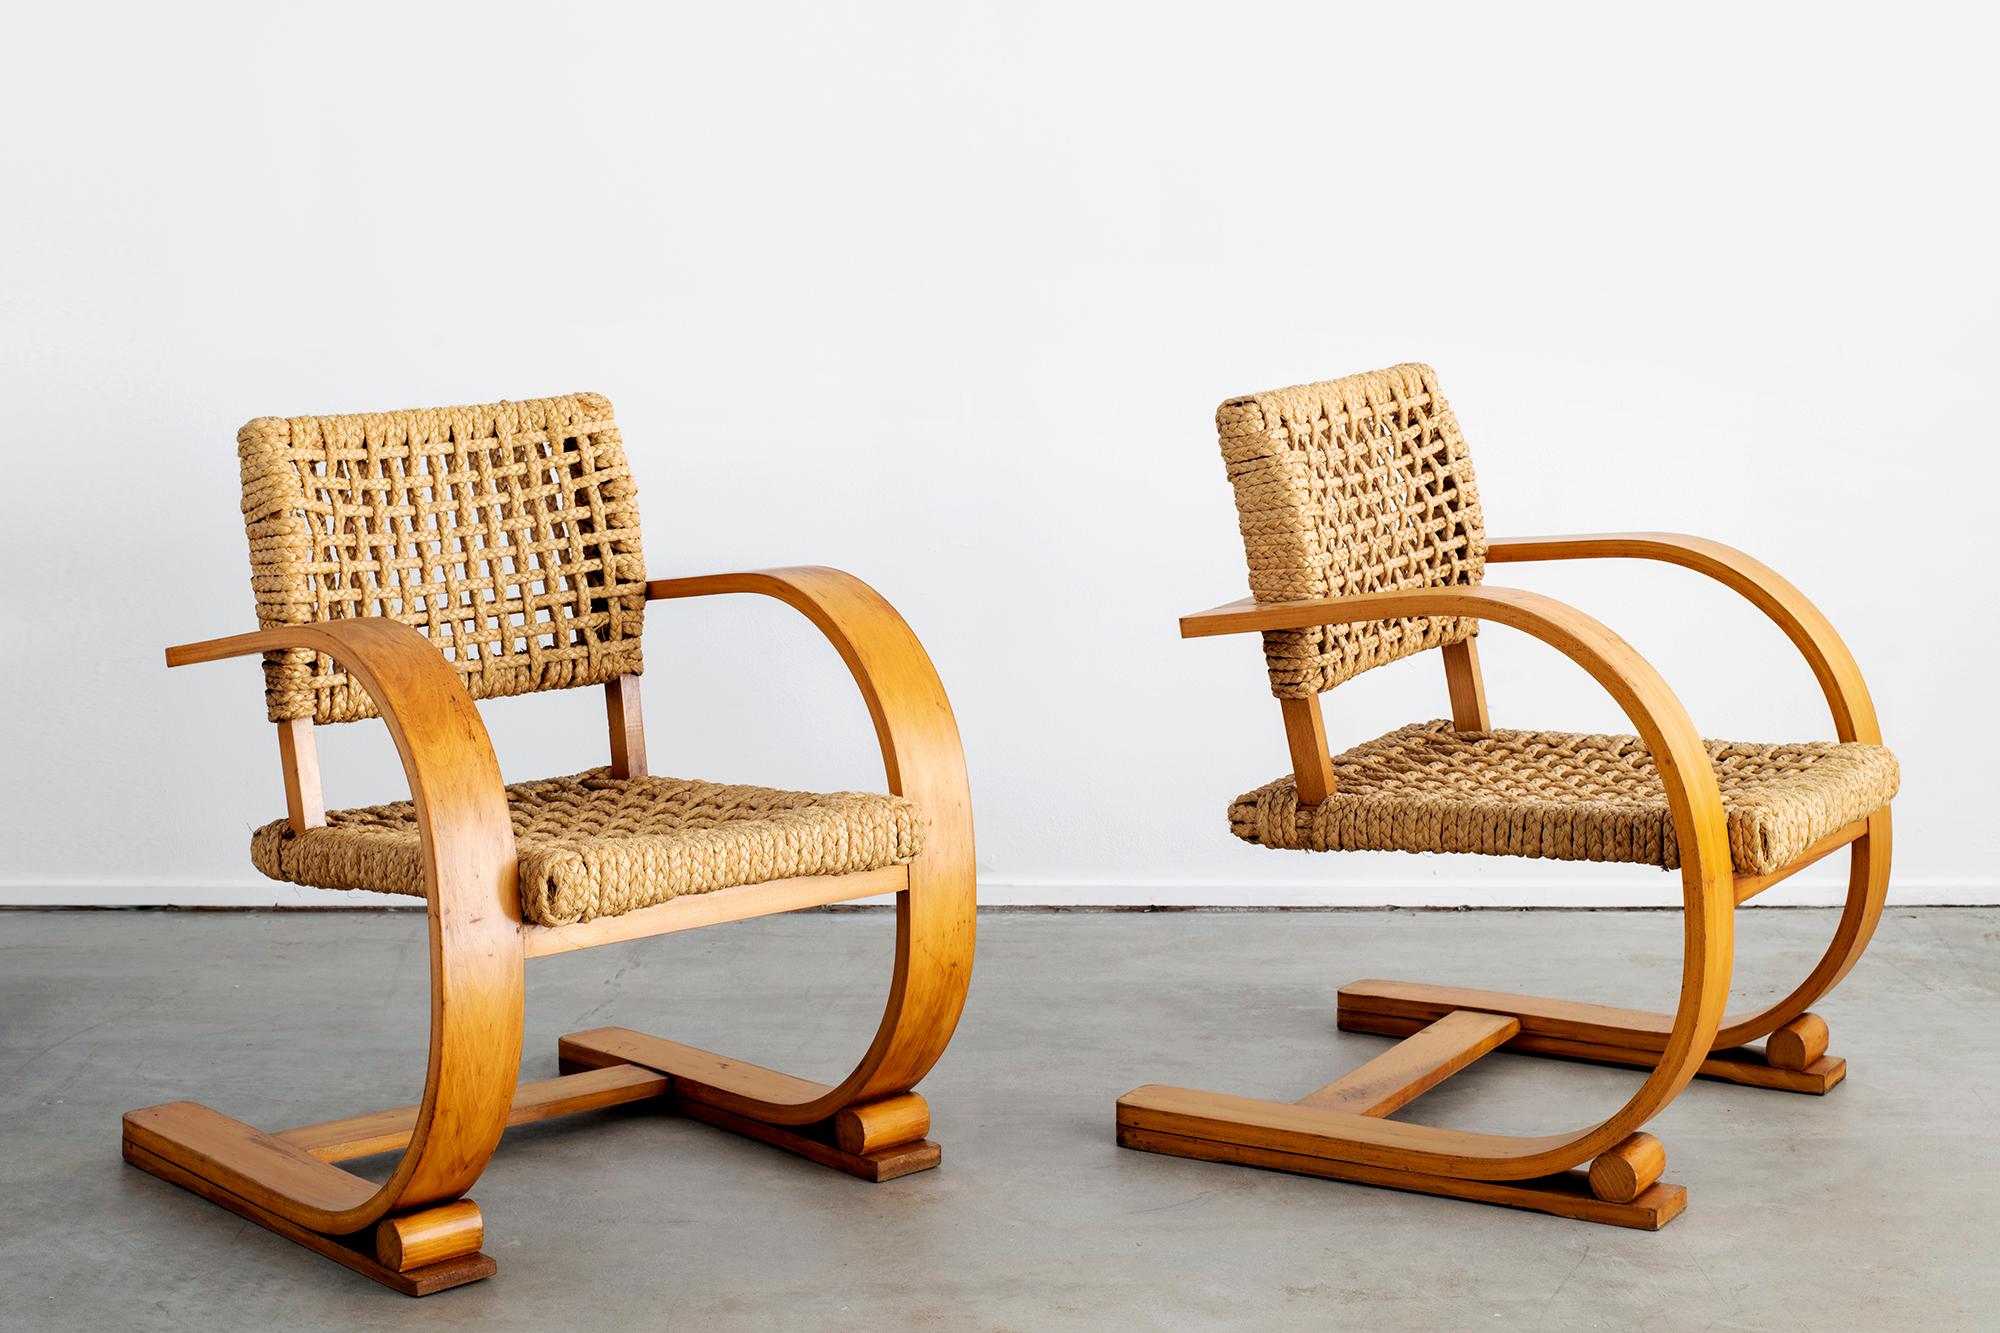 Amazing pair of chairs by Paris designer - Adrien Audoux & Frida Minet.
Classic modern French design with rope seats and backs
Wide French bent oakwood arms with fantastic patina.

Matching table available - sold separately. 

 